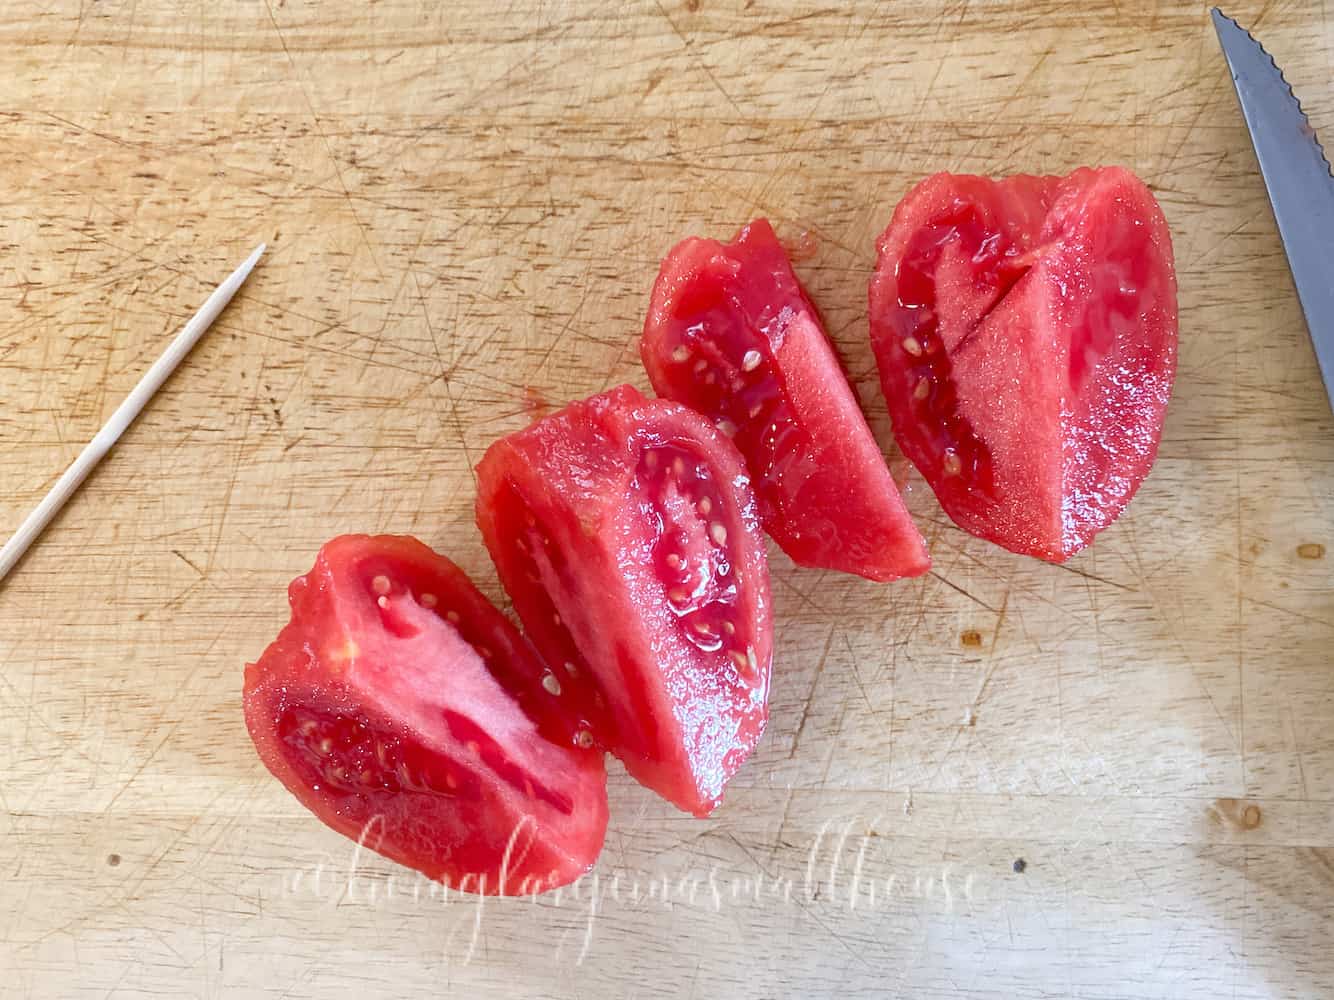 blanched, skinned tomato cut into quarters